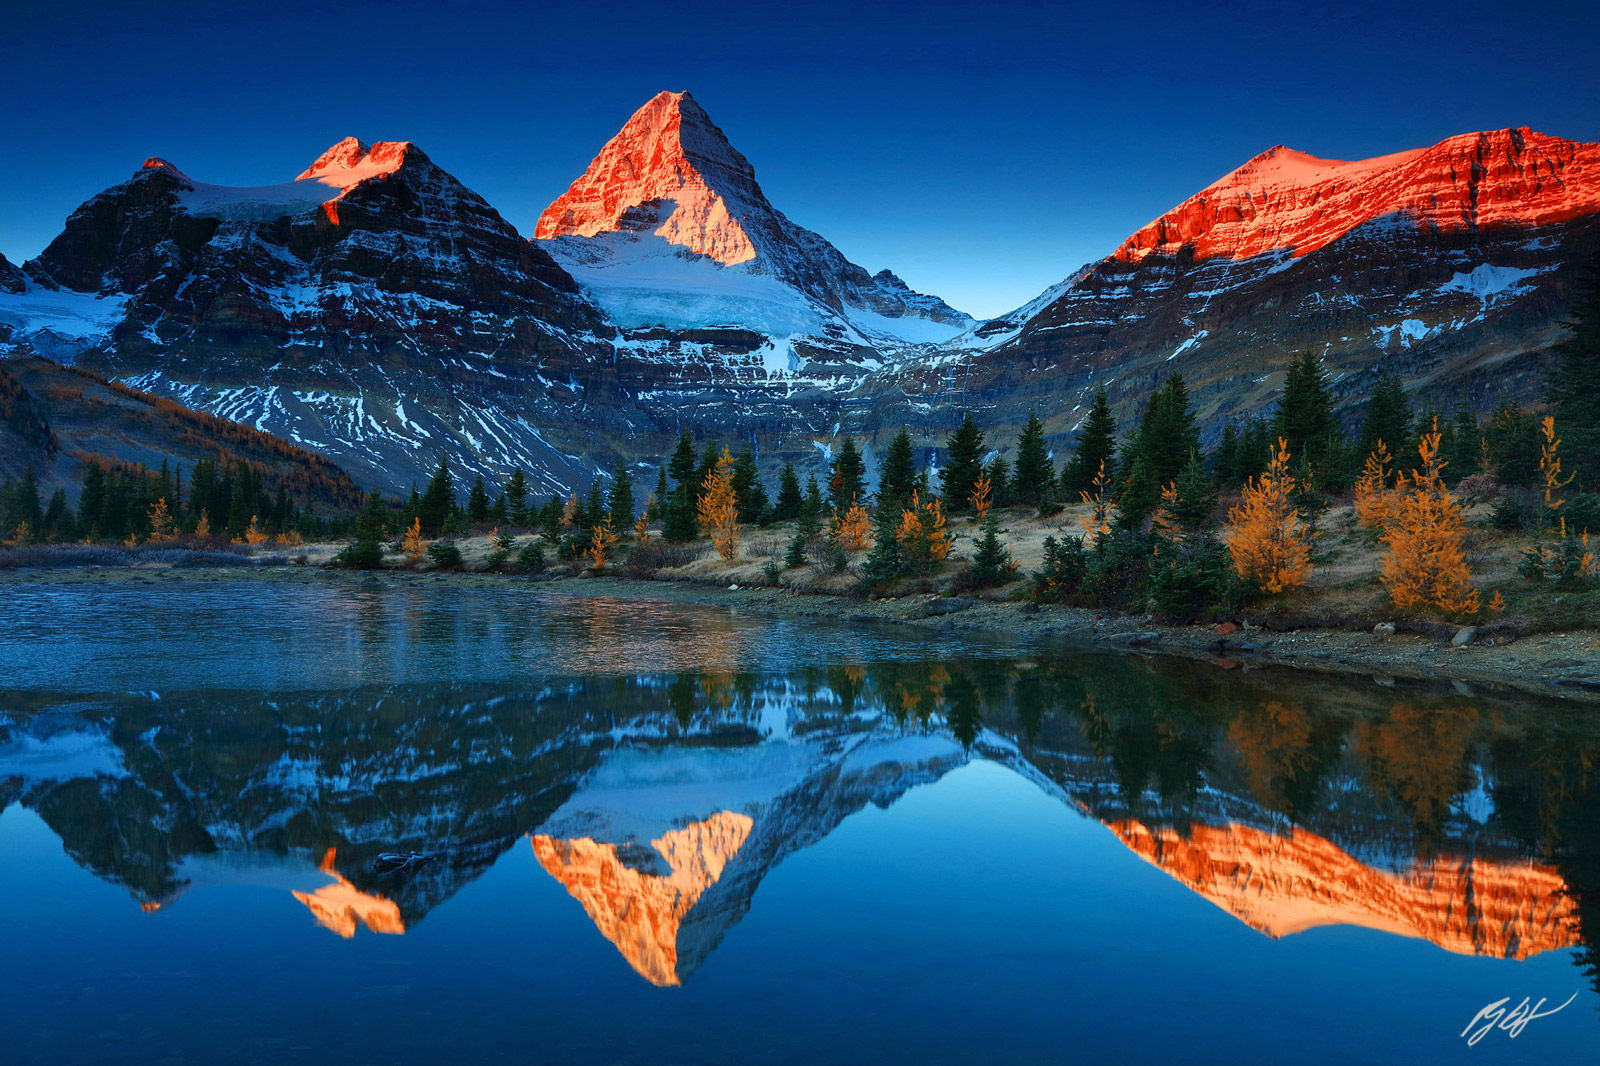 Sunrise Mt Assiniboine Reflected in a Tarn from Mt Assiniboine Provincial Park in British Columbia, Canada